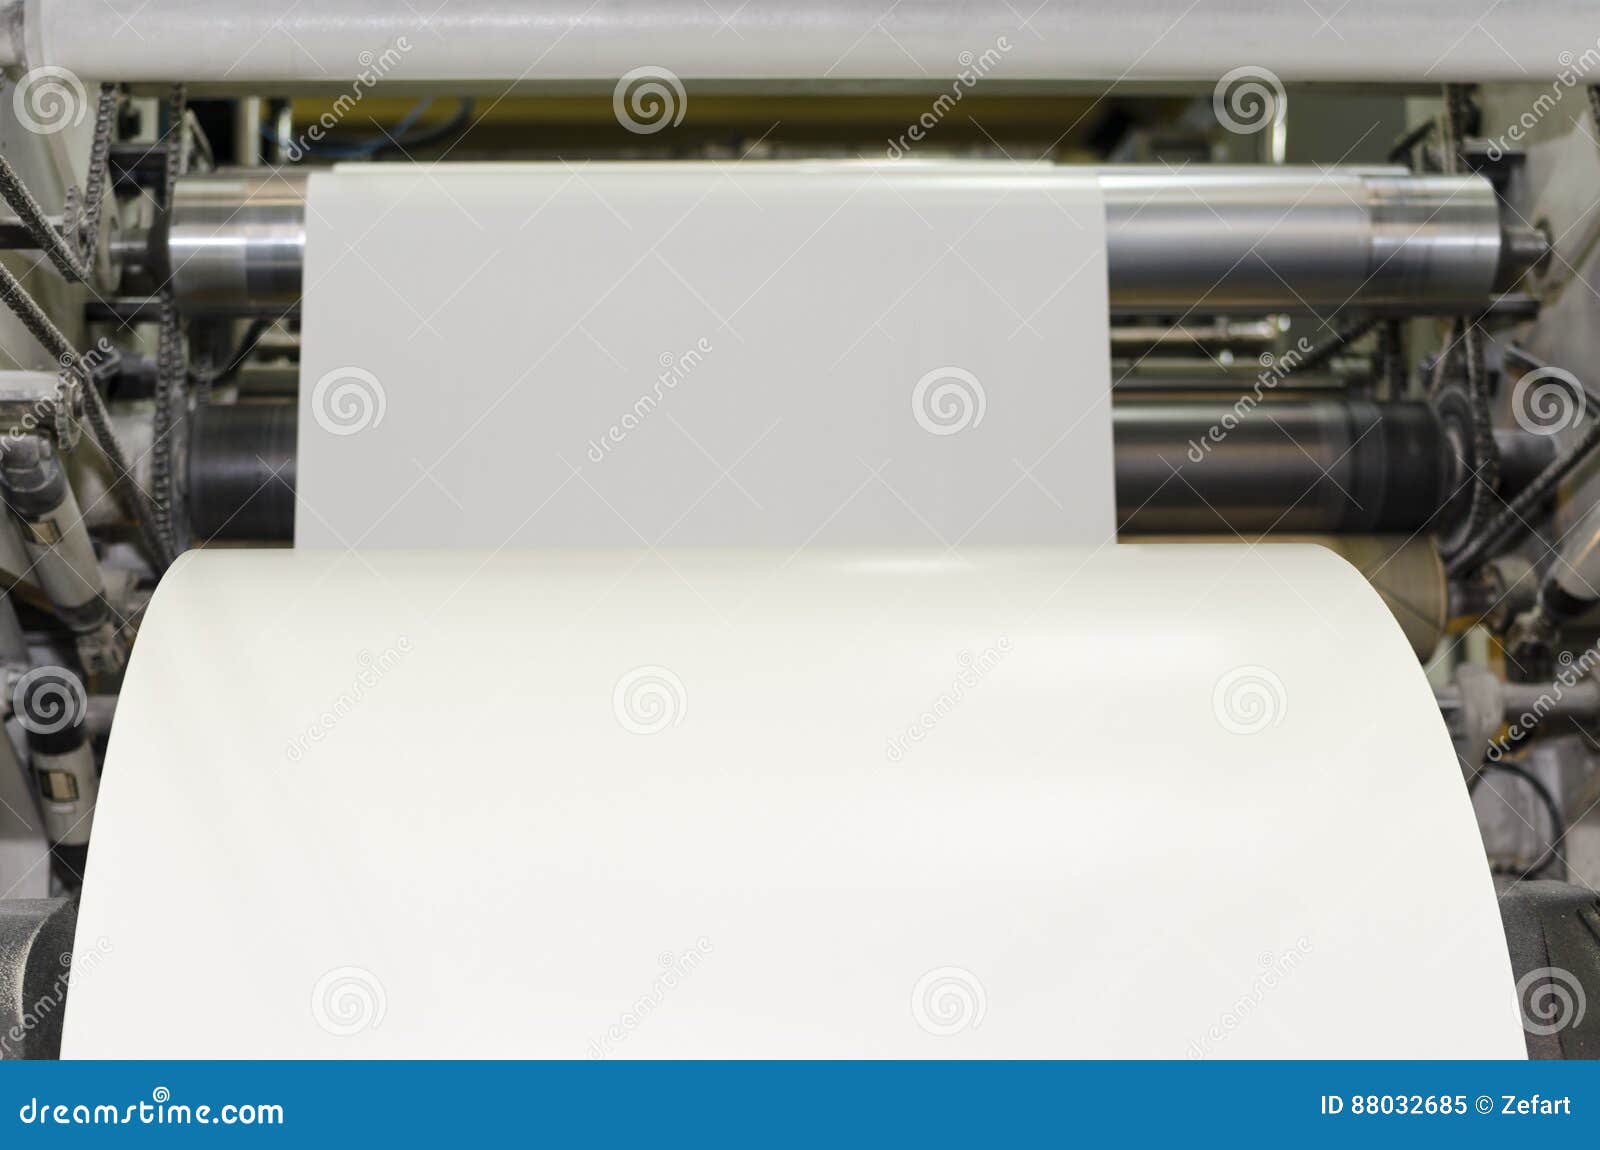 Large Paper Roll Print Machine Stock Image - Image of business